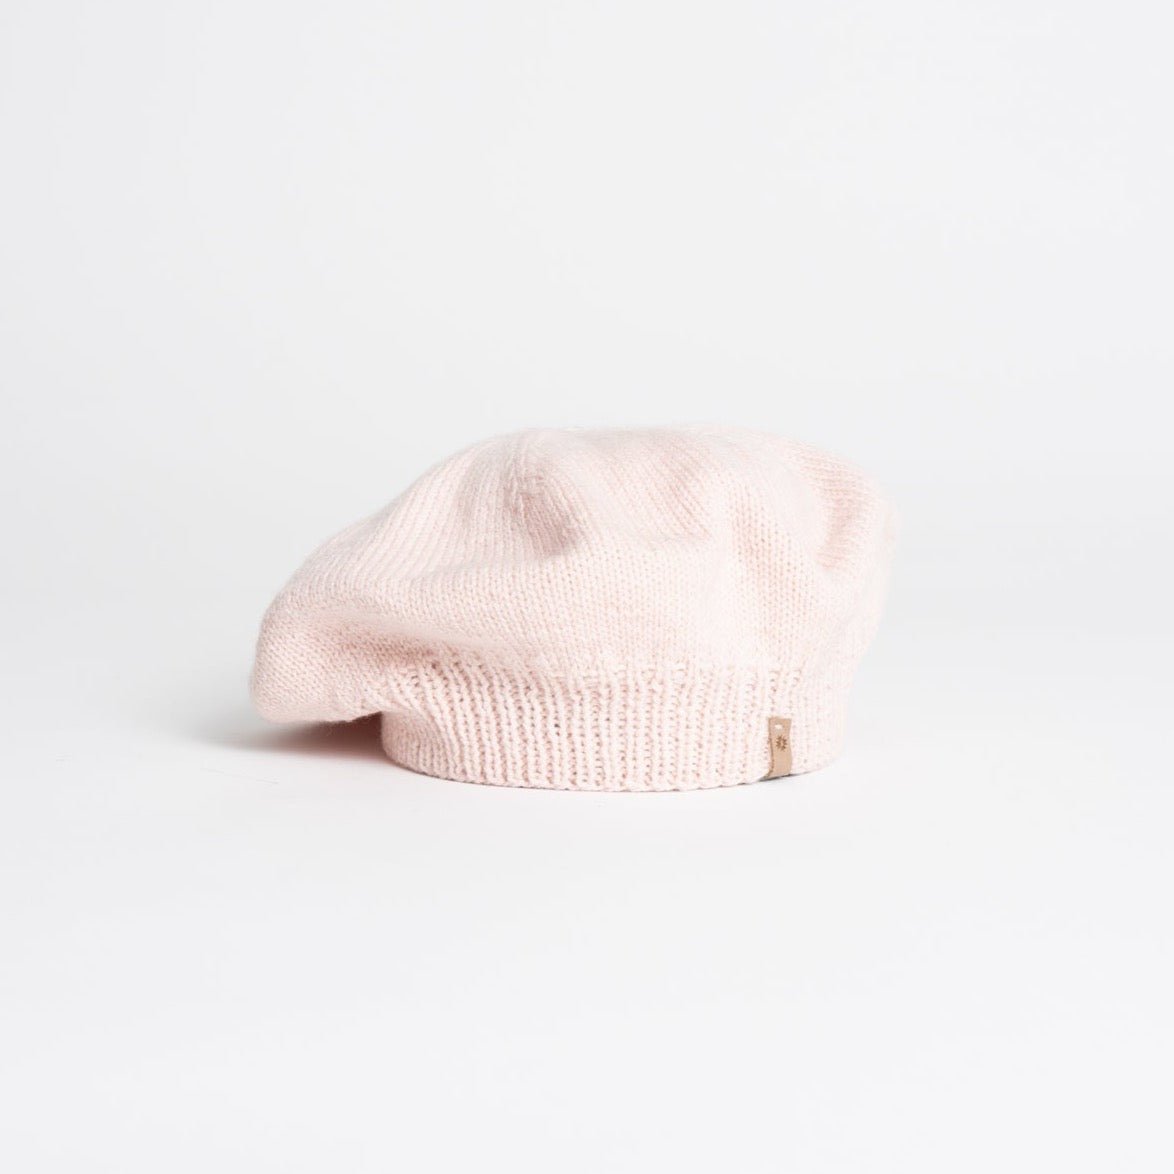 A light pink beret sits against a white background. The Merino Handknit Beret in Blush pink is designed by Dinadi and hand knit in Nepal.